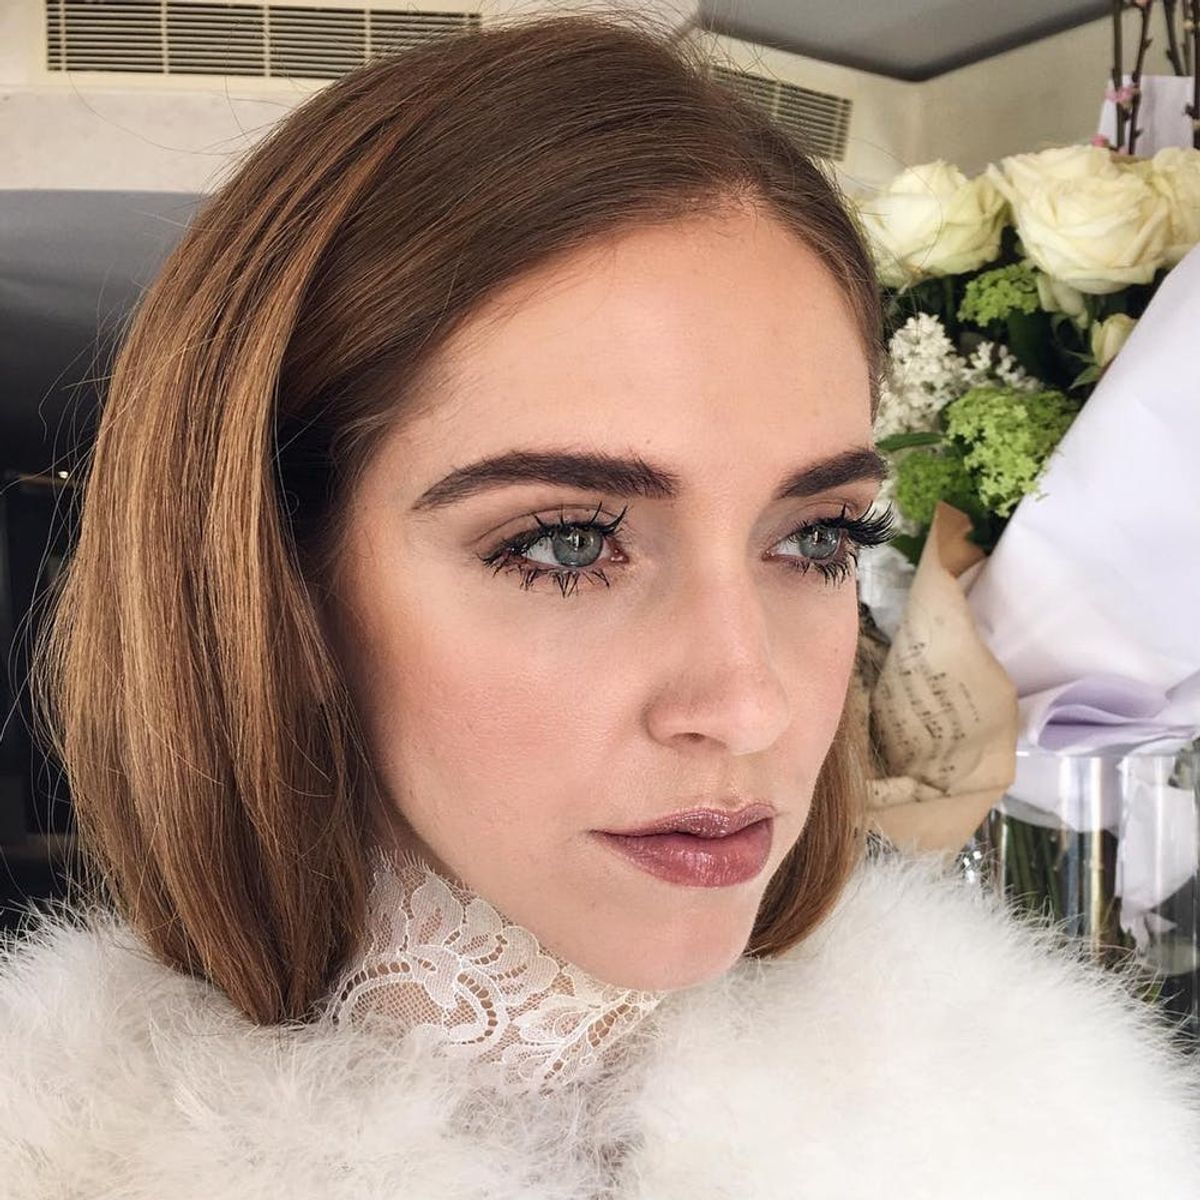 11 Beauty Looks to Copy for Your Halloween Wedding